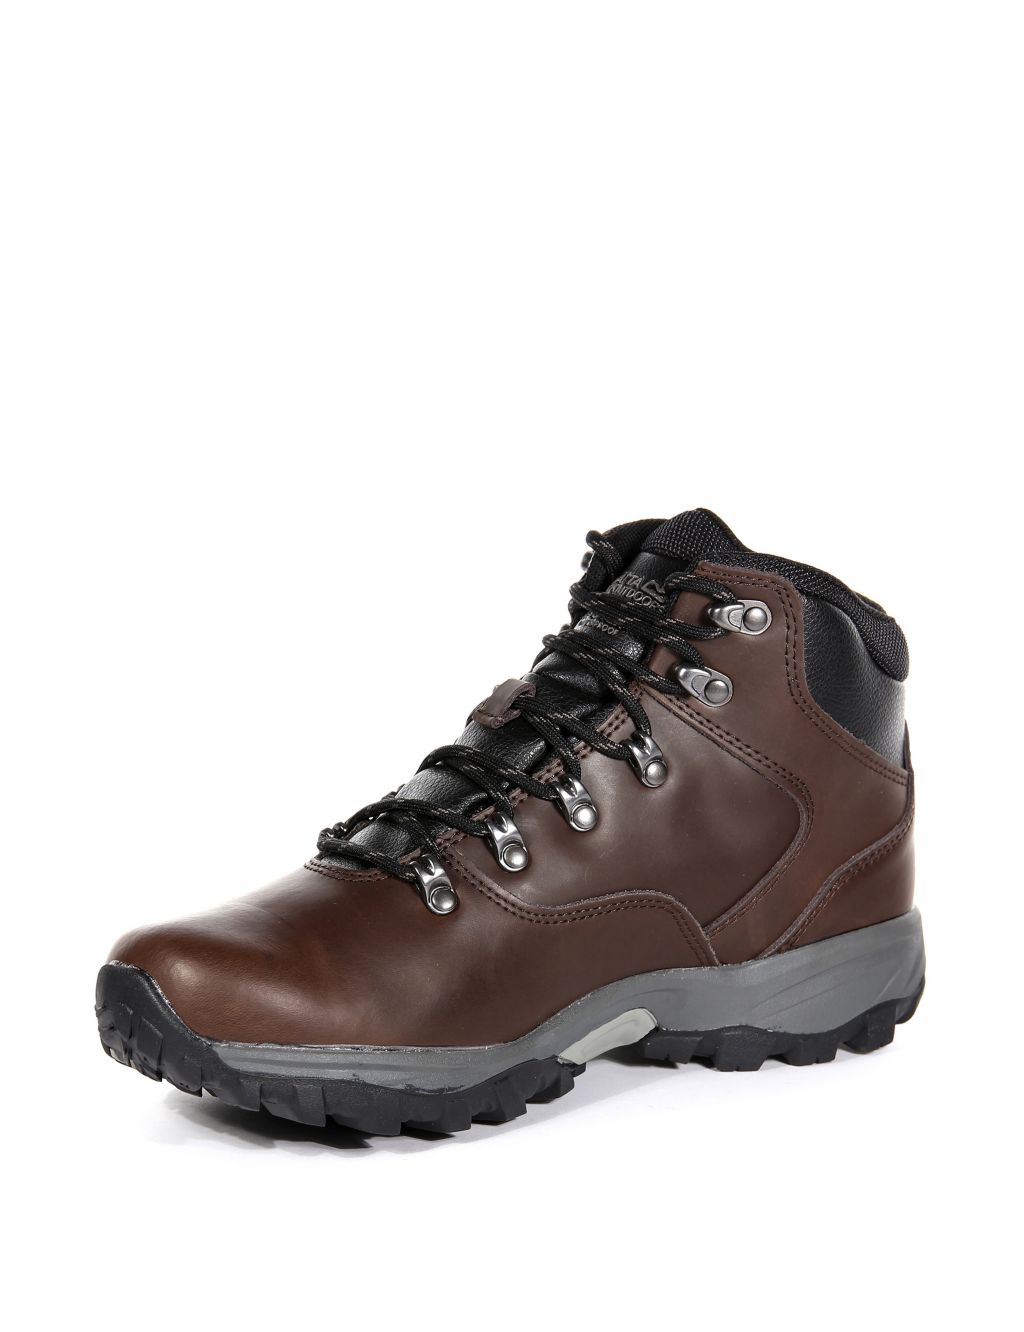 Bainsford Leather Waterproof Walking Boots image 4